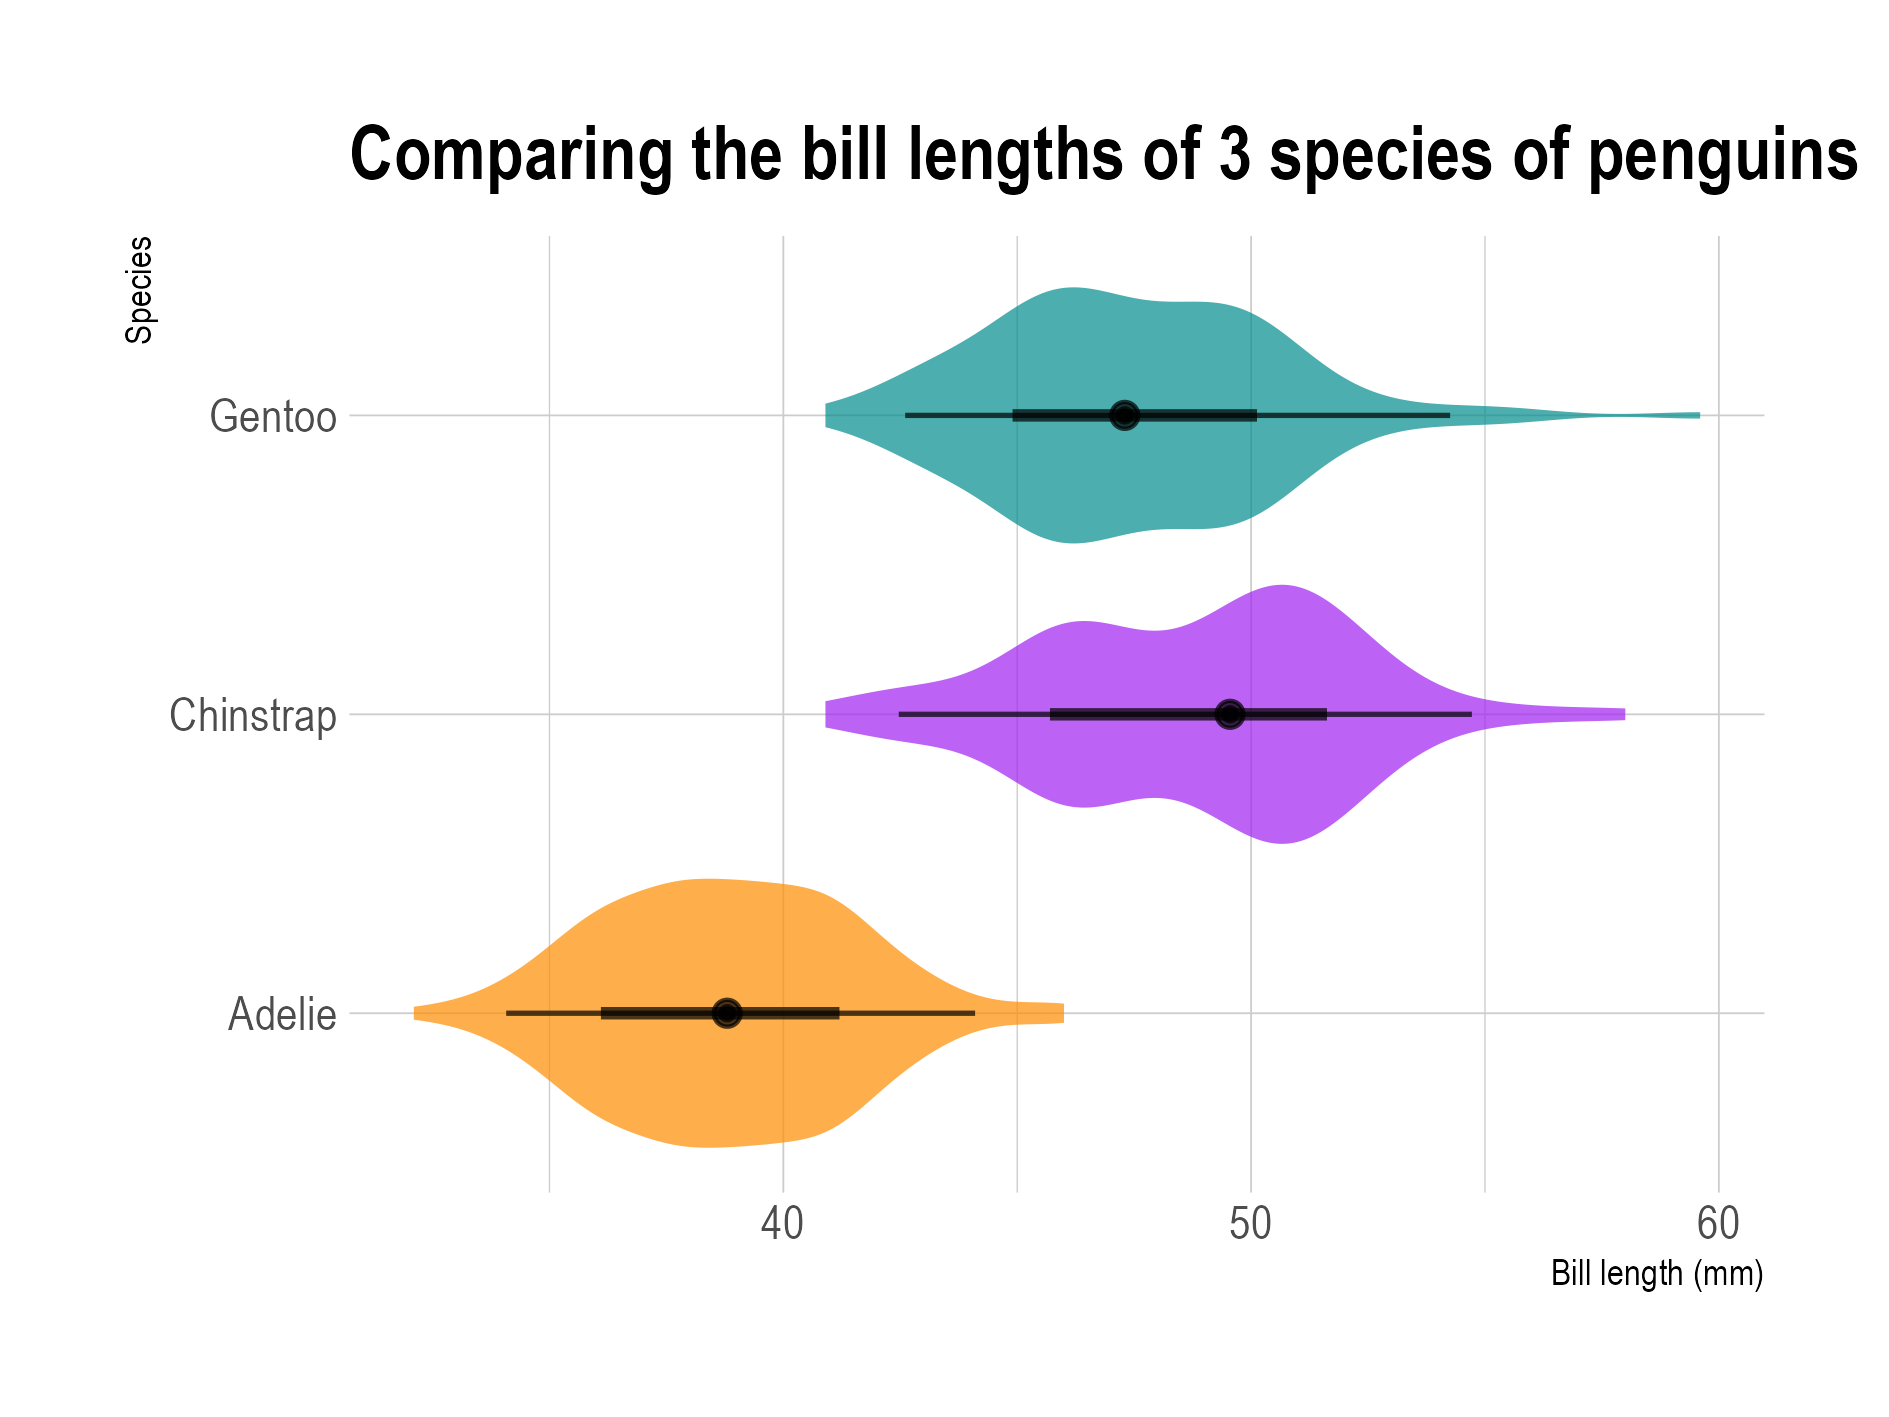 3 eye plots showing the distribution of the bill lengths of the 3 species of penguin